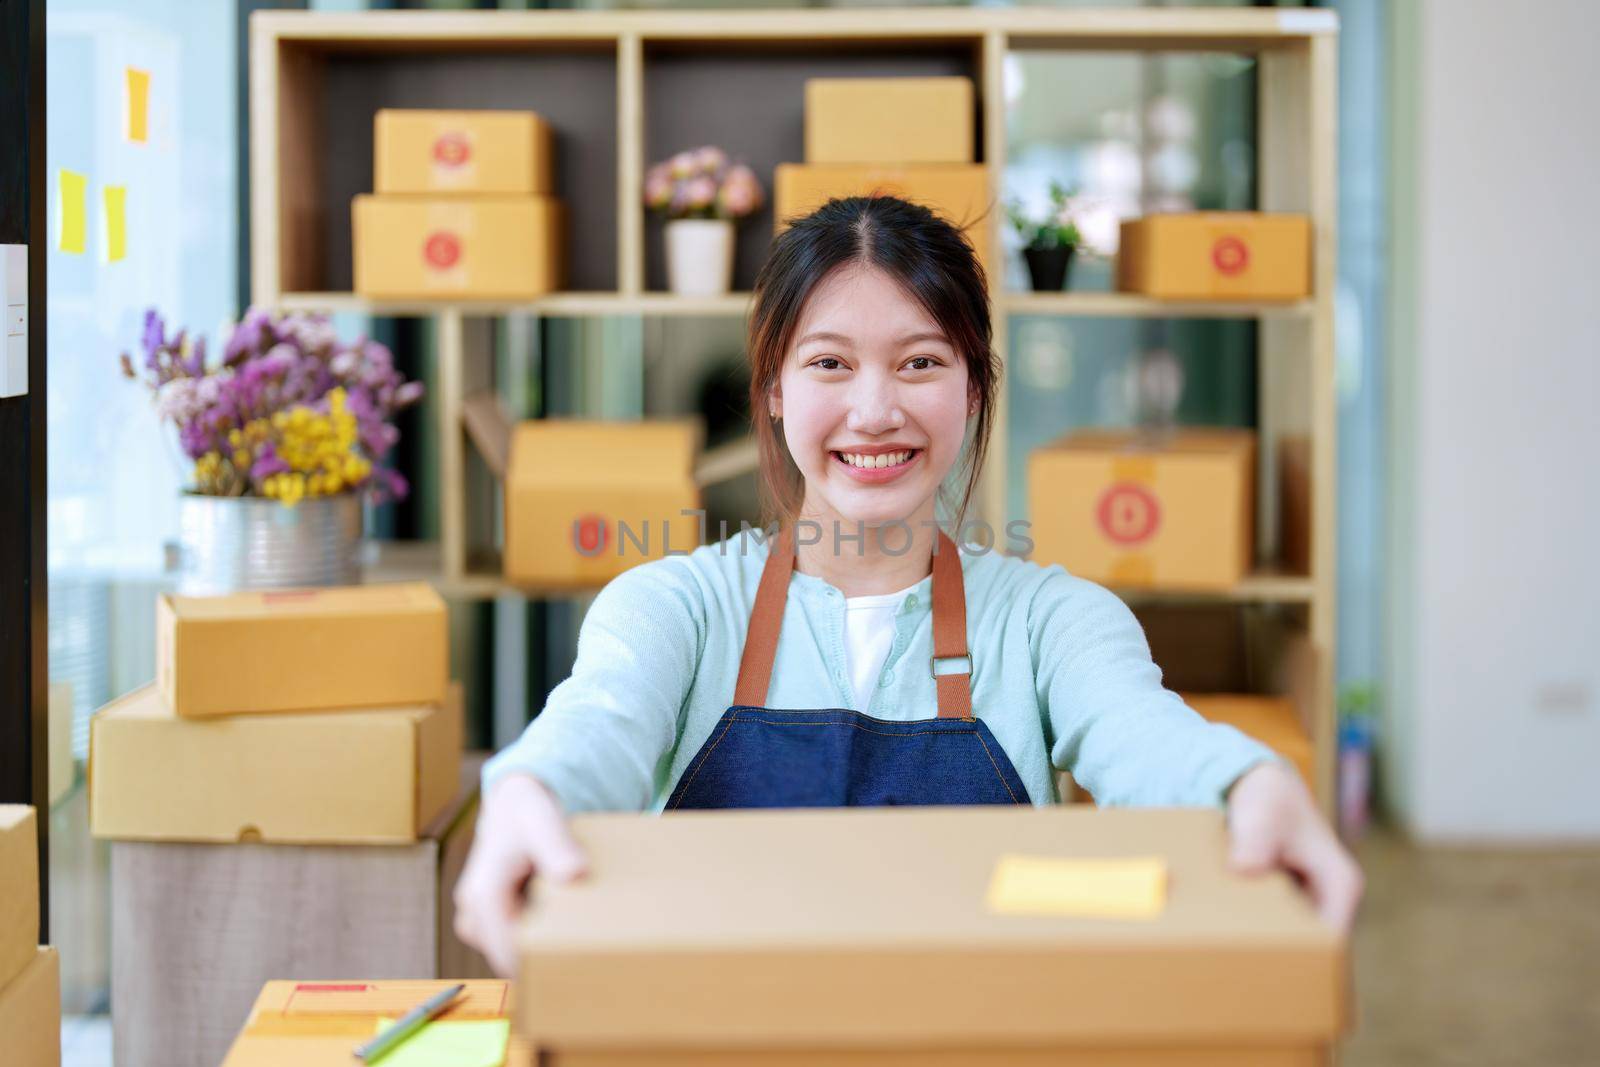 Portrait of a business woman, sme packing products in boxes and showing delivery to customers according to their orders.